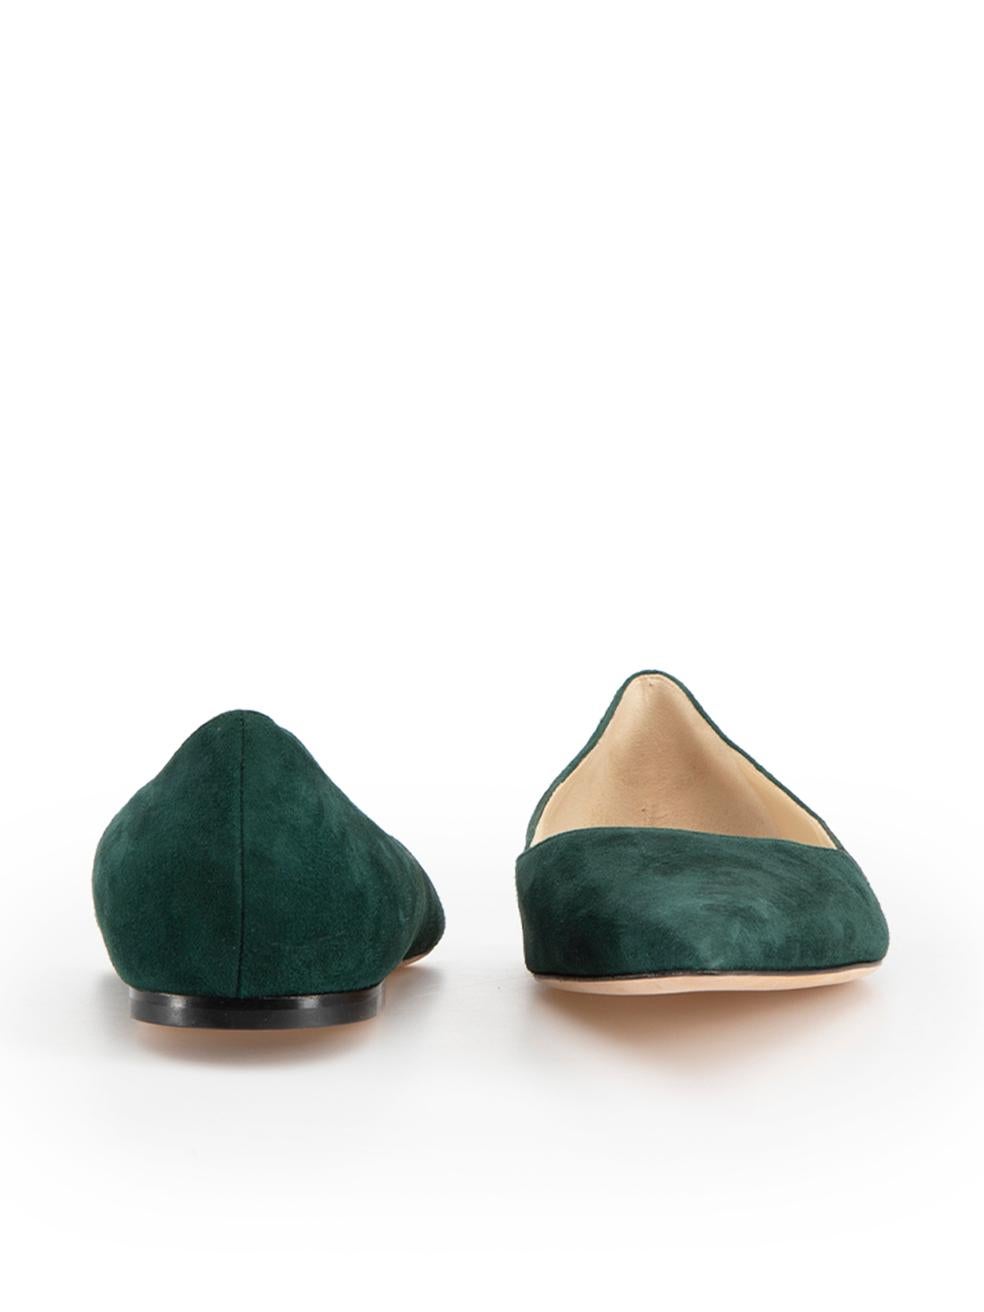 Jimmy Choo Green Suede Pointed-Toe Flats Size IT 41.5 In Good Condition For Sale In London, GB